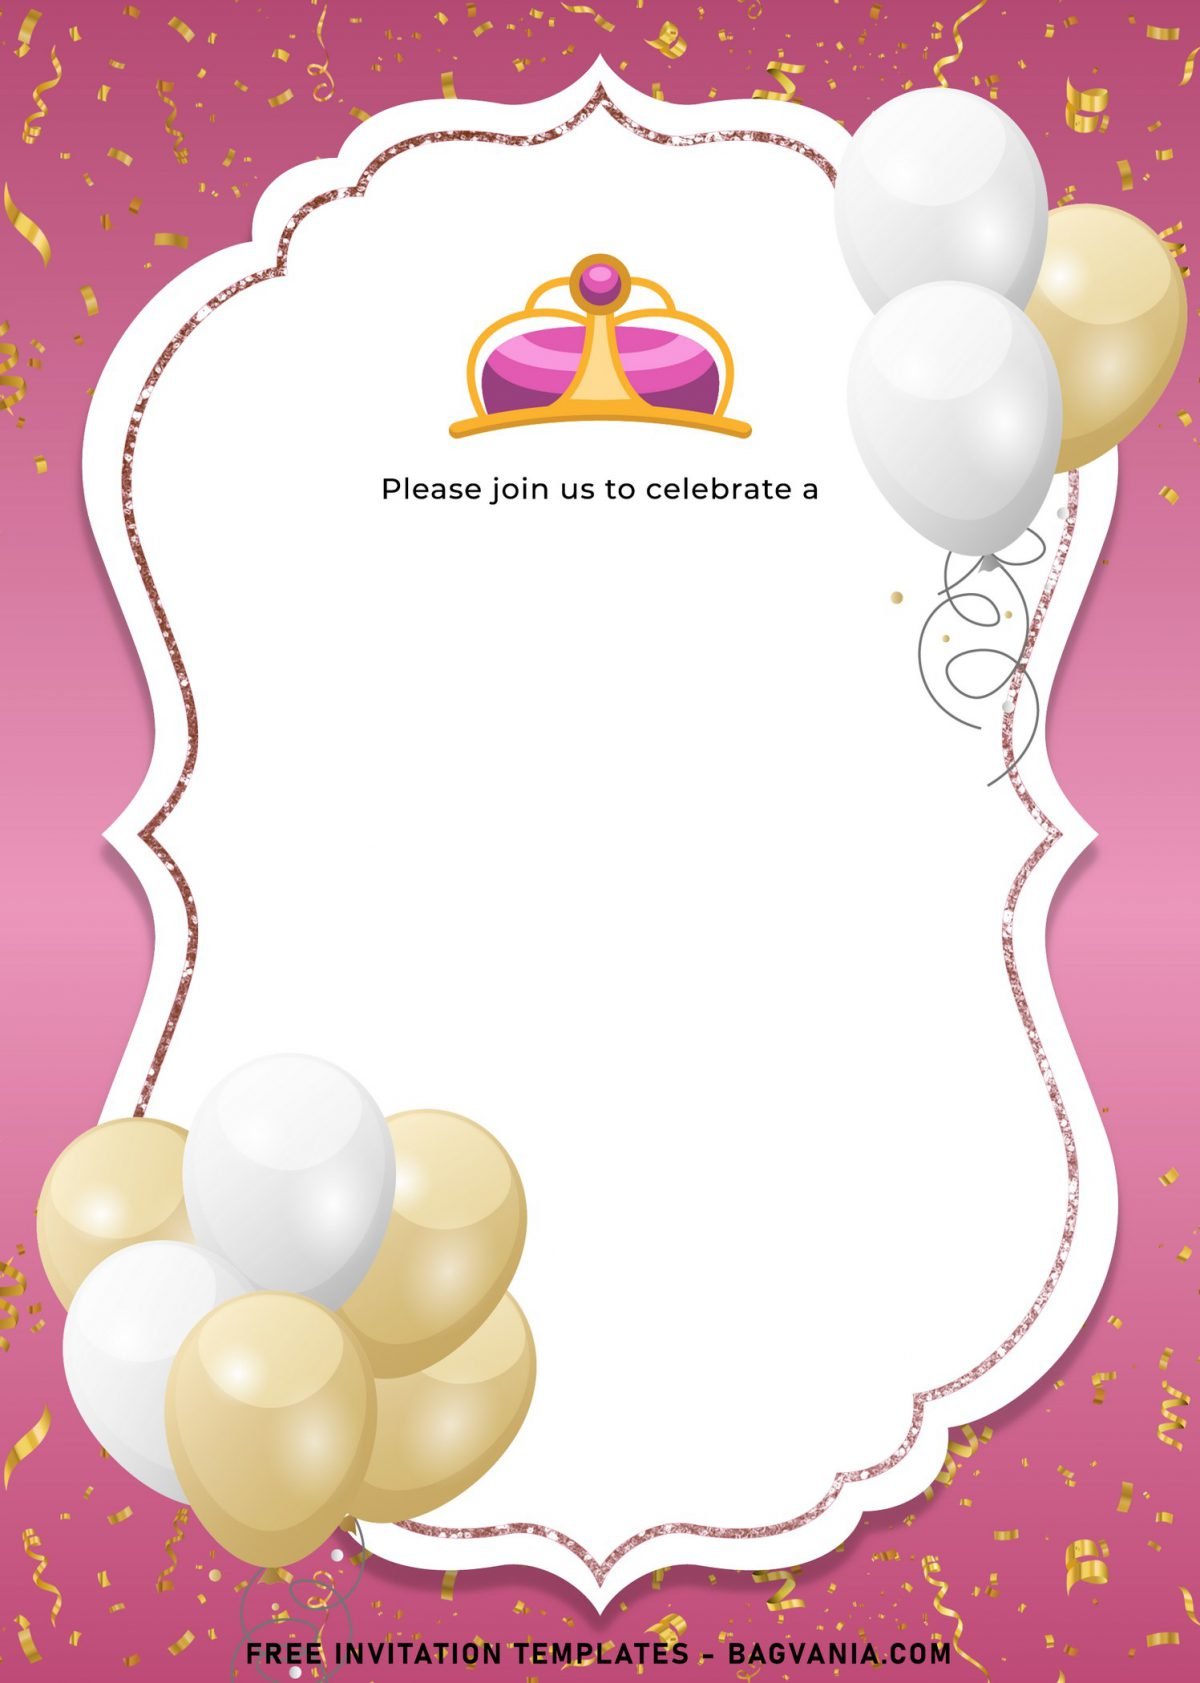 7+ Elegant Birthday Invitation Templates For Your Kid's Upcoming Birthday and has Bracket Text Frame